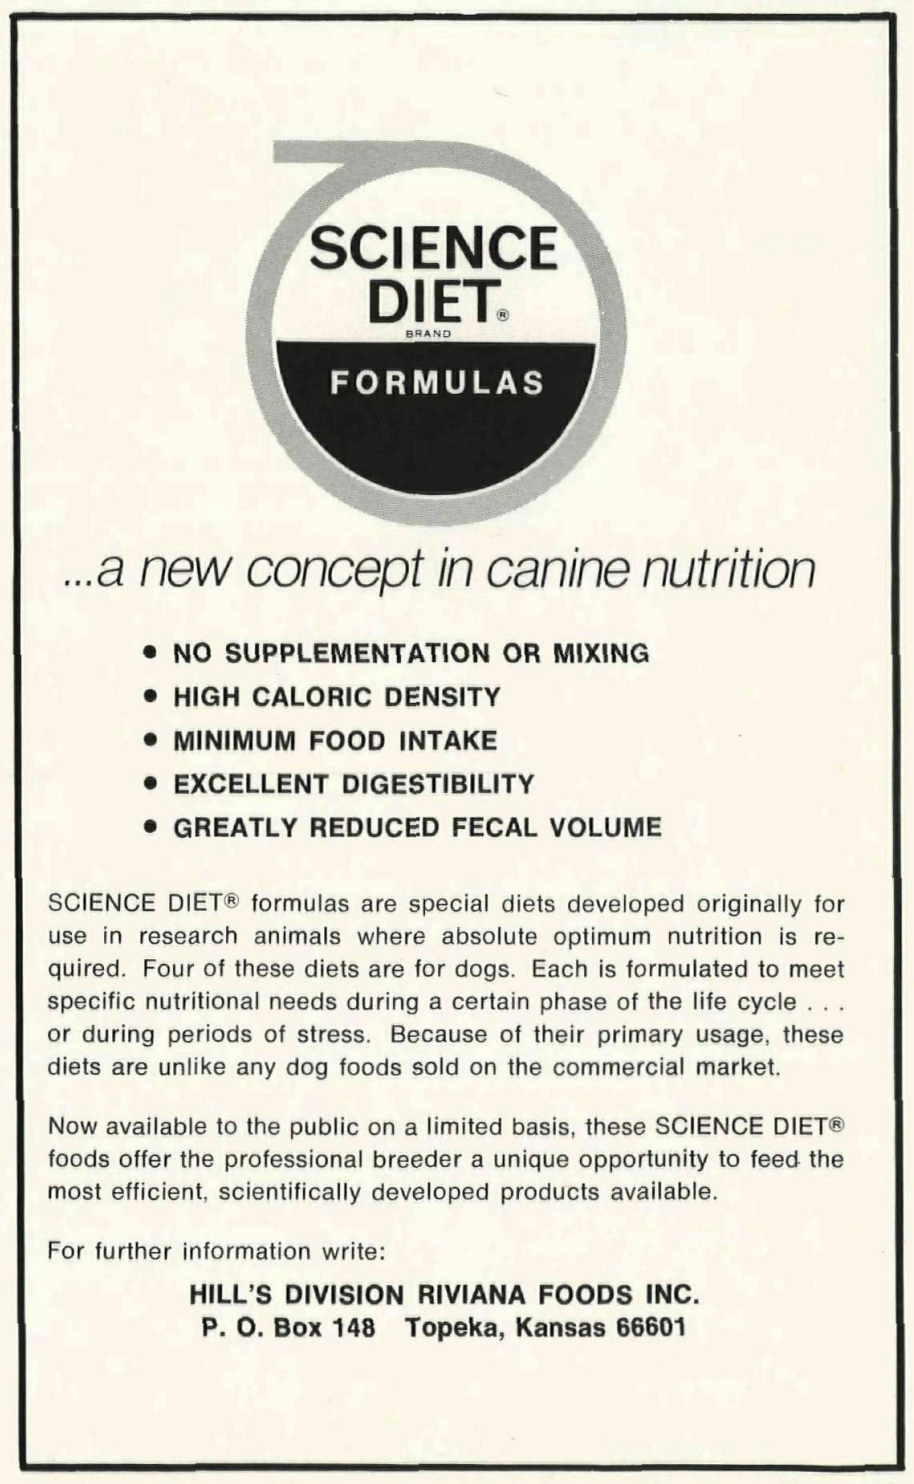 Science Diet ad from Animal Cavalcade magazine, March/April 1973.